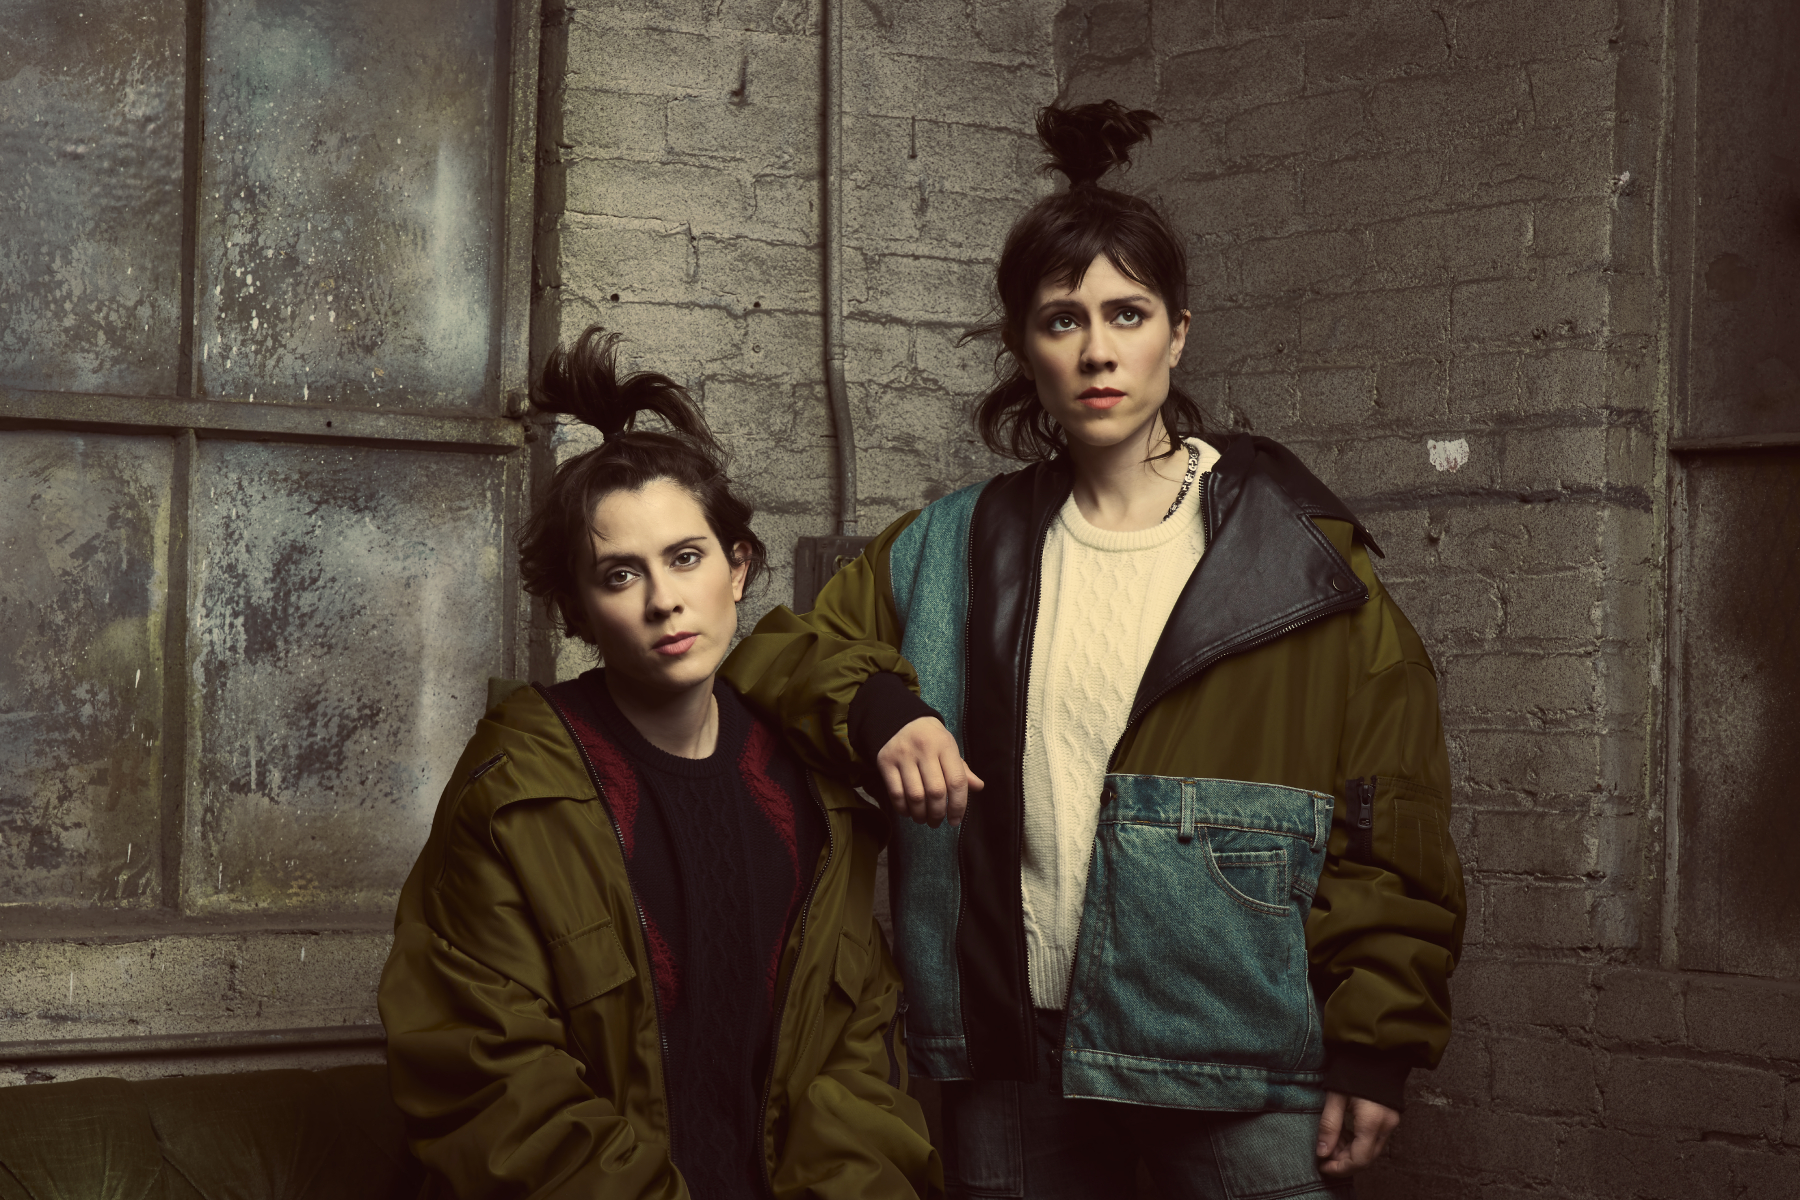 Watch Tegan and Sara’s New ‘F-cking Up What Matters’ Video